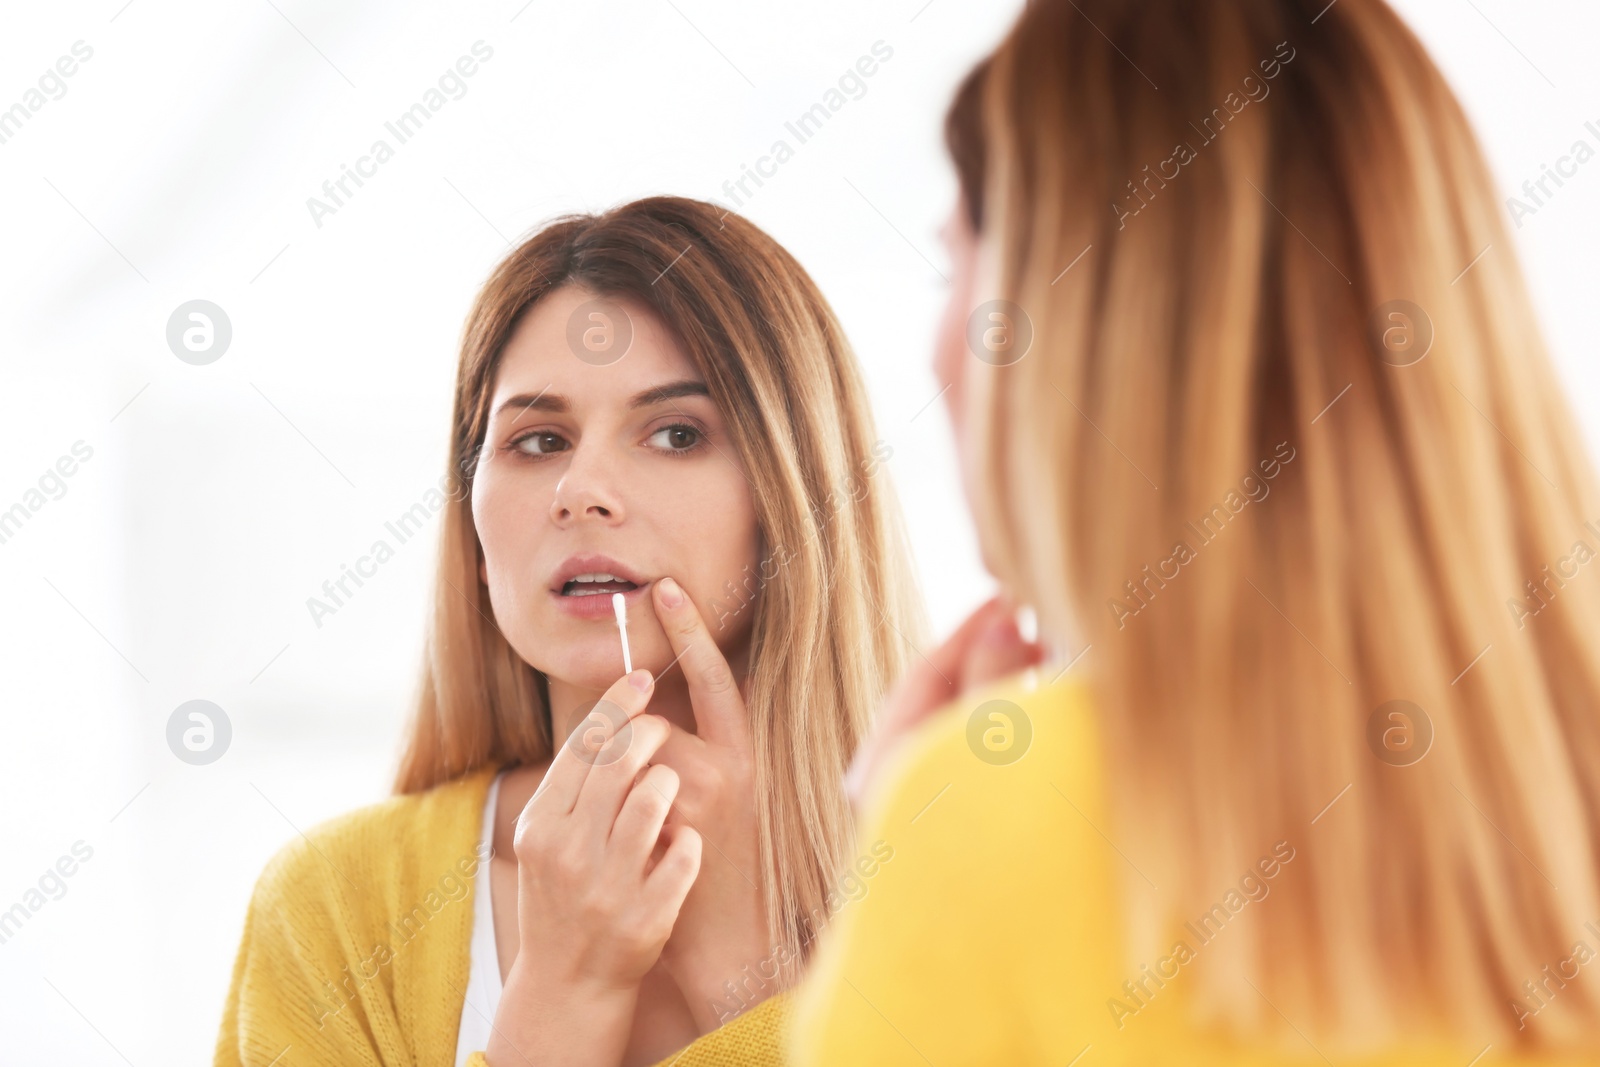 Photo of Woman applying cold sore cream on lips in front of mirror